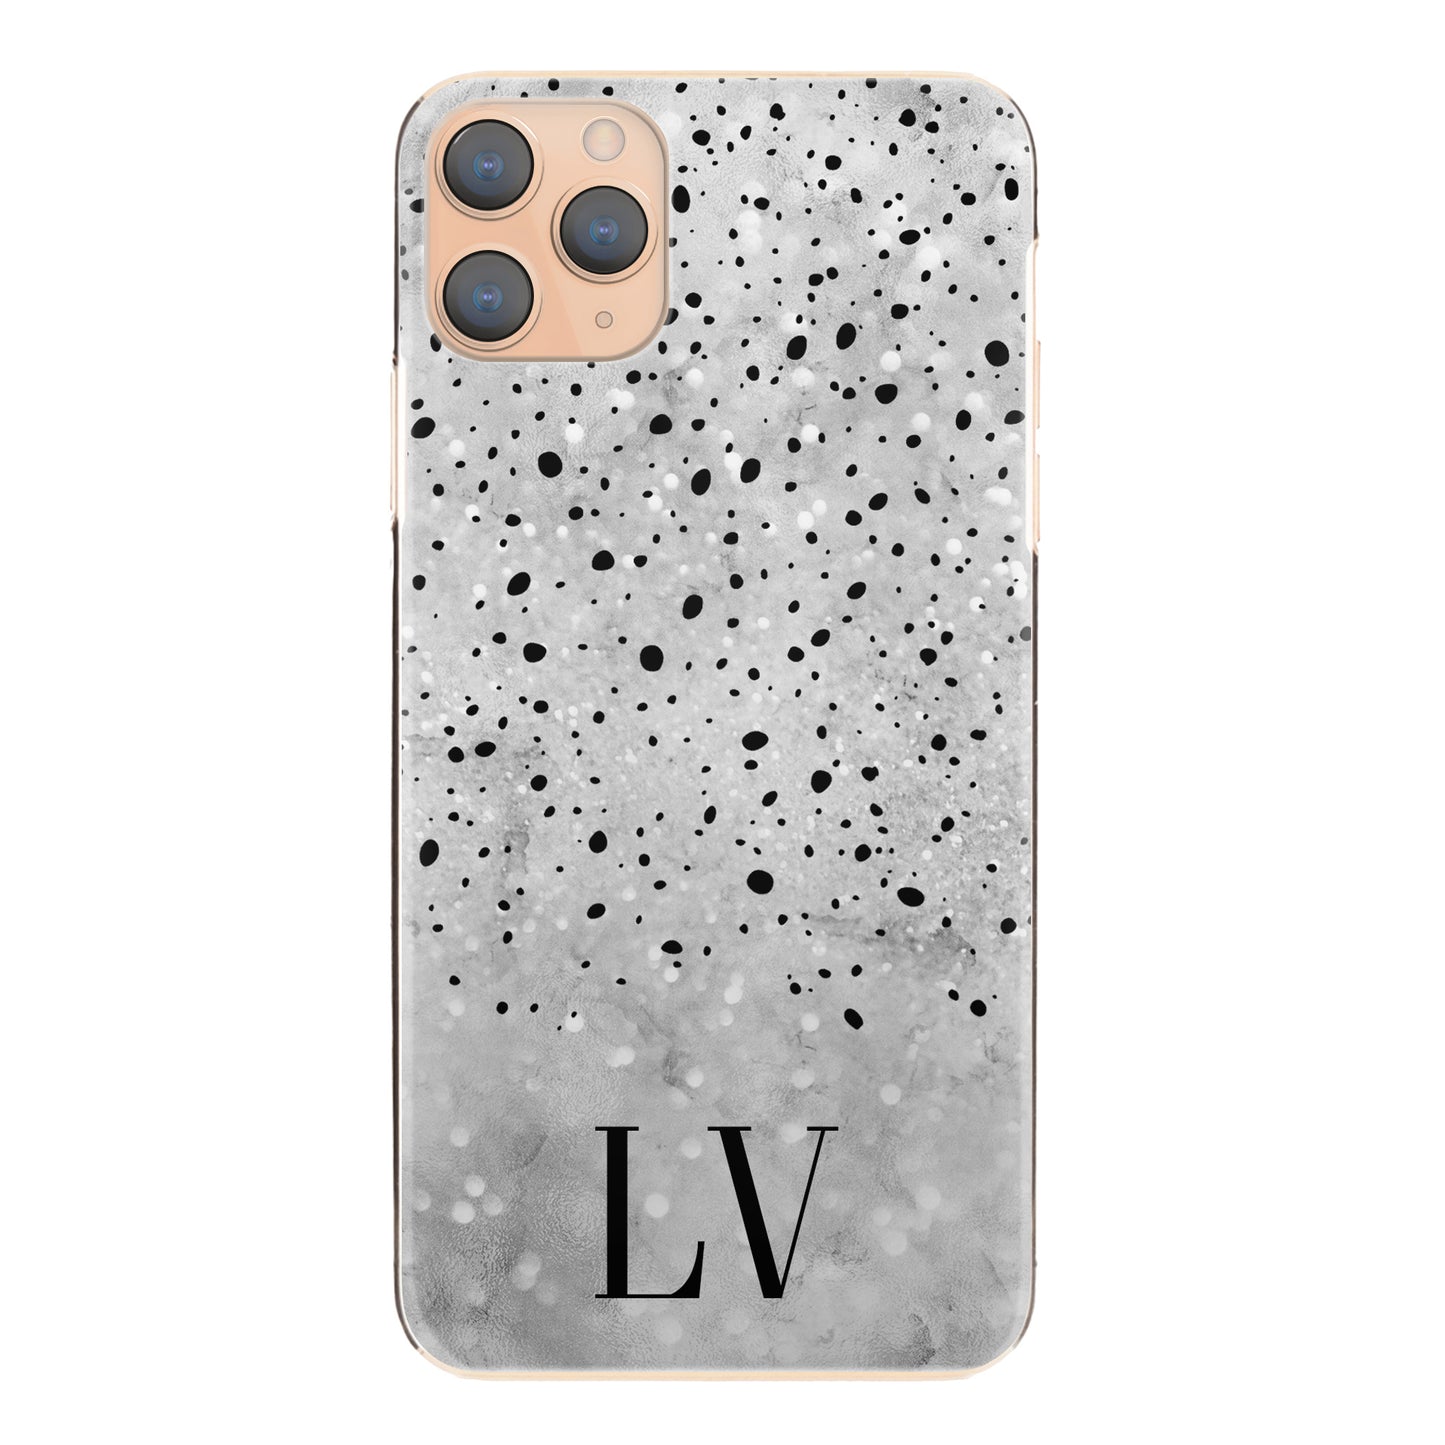 Personalised Oppo Phone Hard Case with Classy Initials on Textured Grey and Black Dots